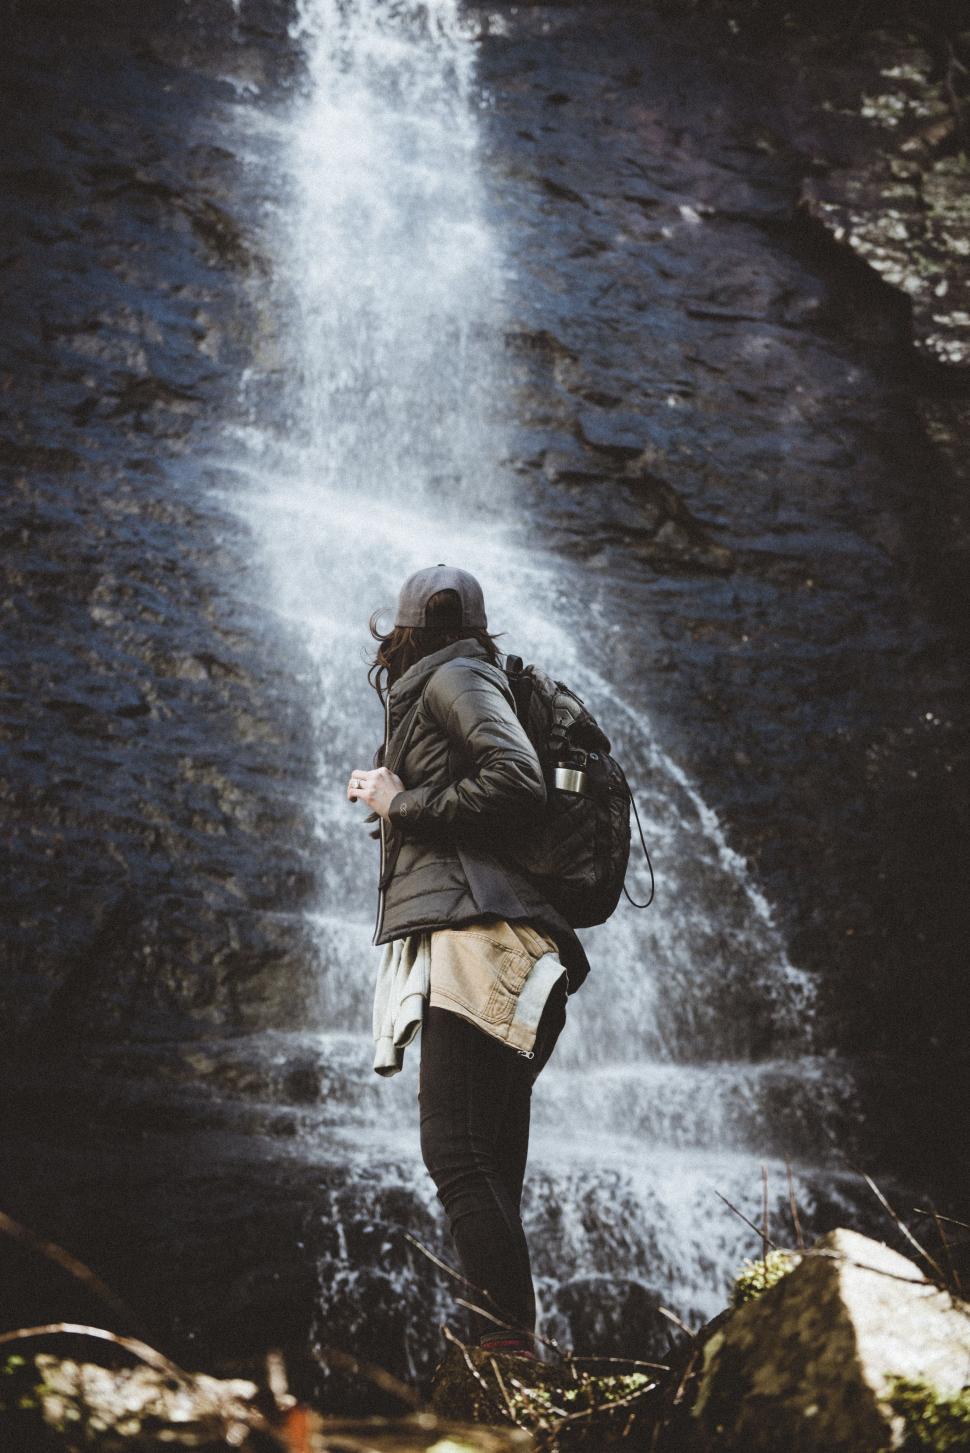 Free Image of Person Standing in Front of Waterfall 